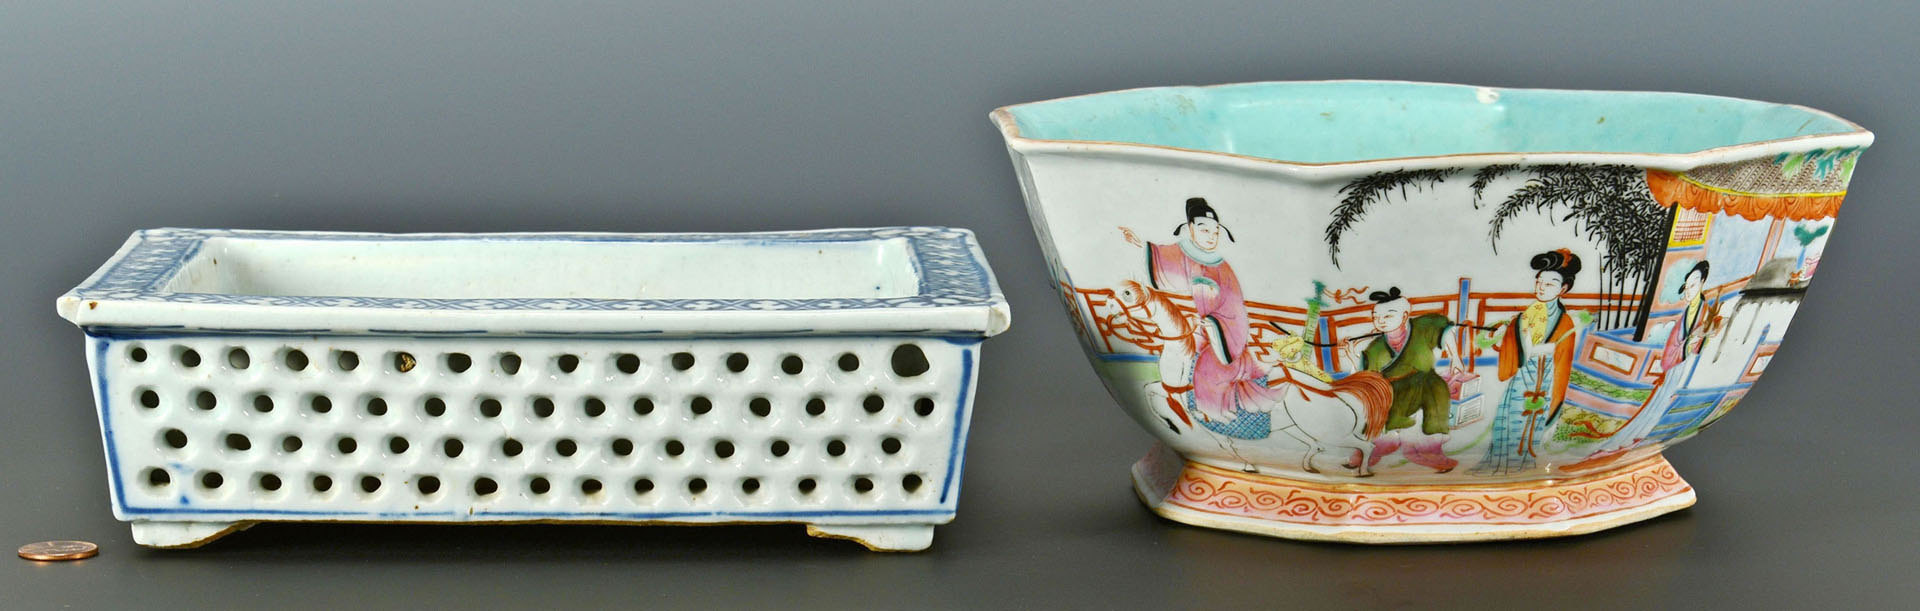 Lot 223: 2 Chinese Export Porcelain Items, Bowl & Planter